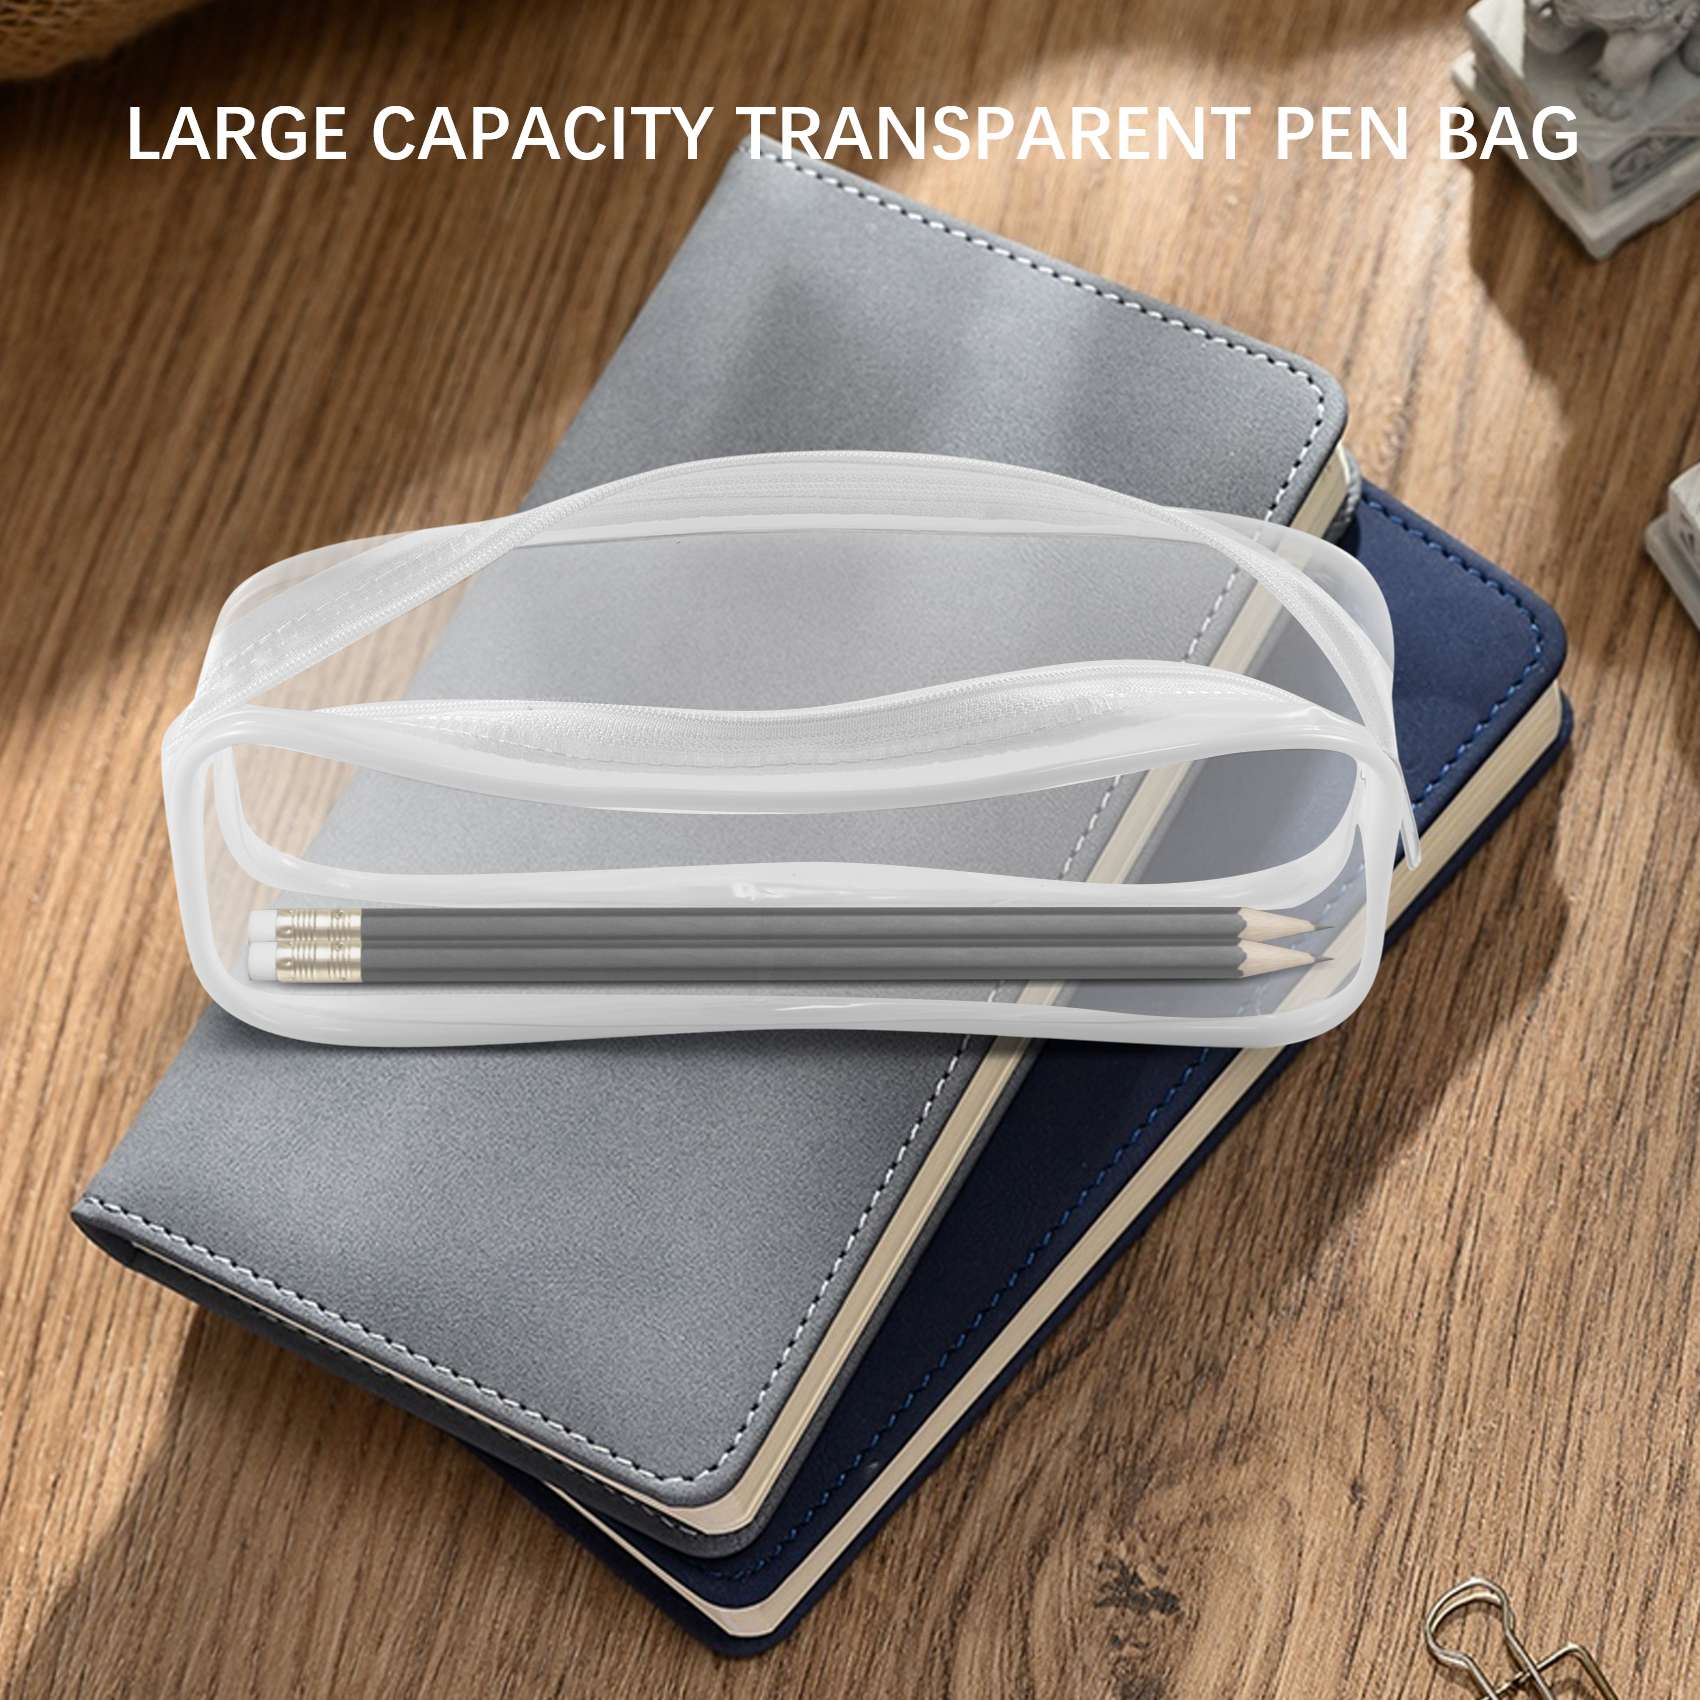 4 Pieces Clear PVC Zipper Pen Pencil Case, Big Capacity Pencil Bag Makeup  Pouch with Zipper for School Office Stationery(White)